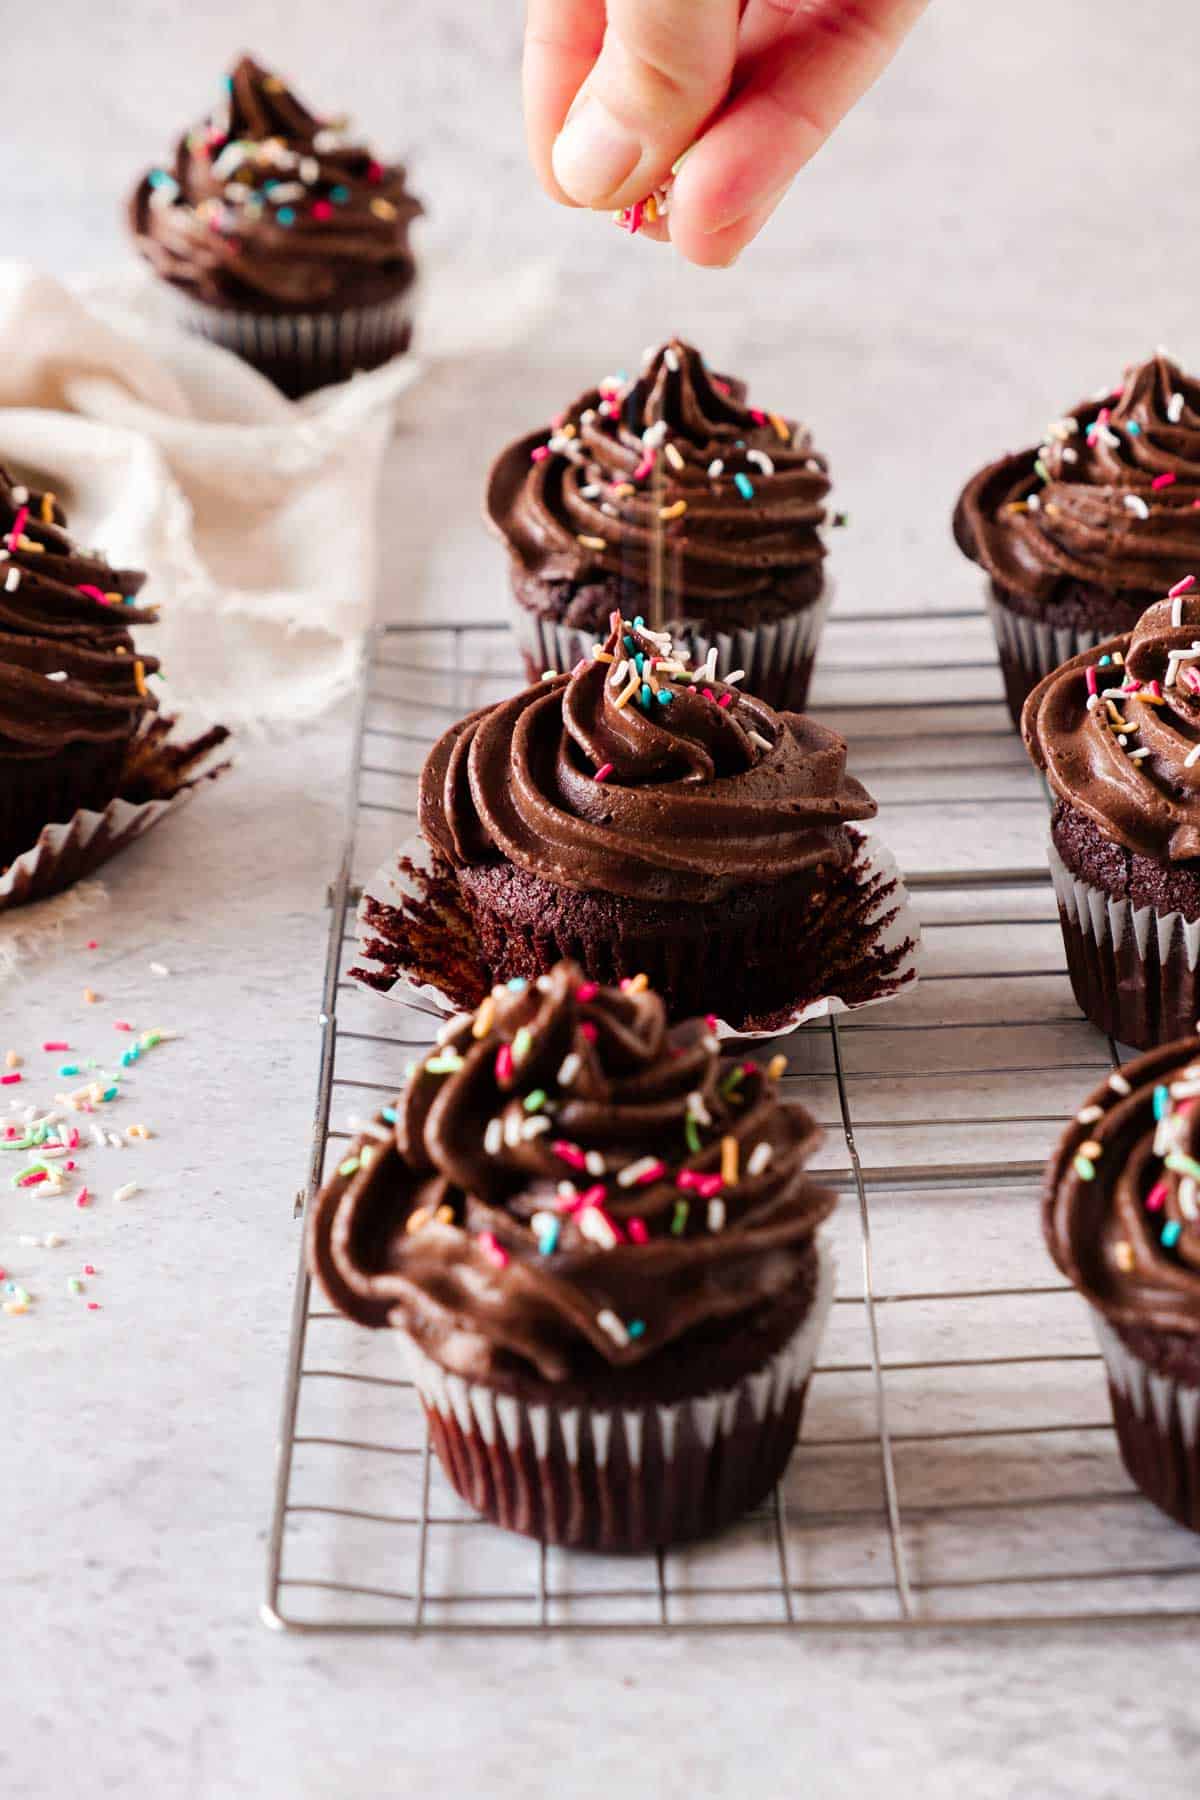 A hand sprinkling colorful sprinkles on chocolate cupcakes with swirls of chocolate frosting arranged on a wire cooling rack.